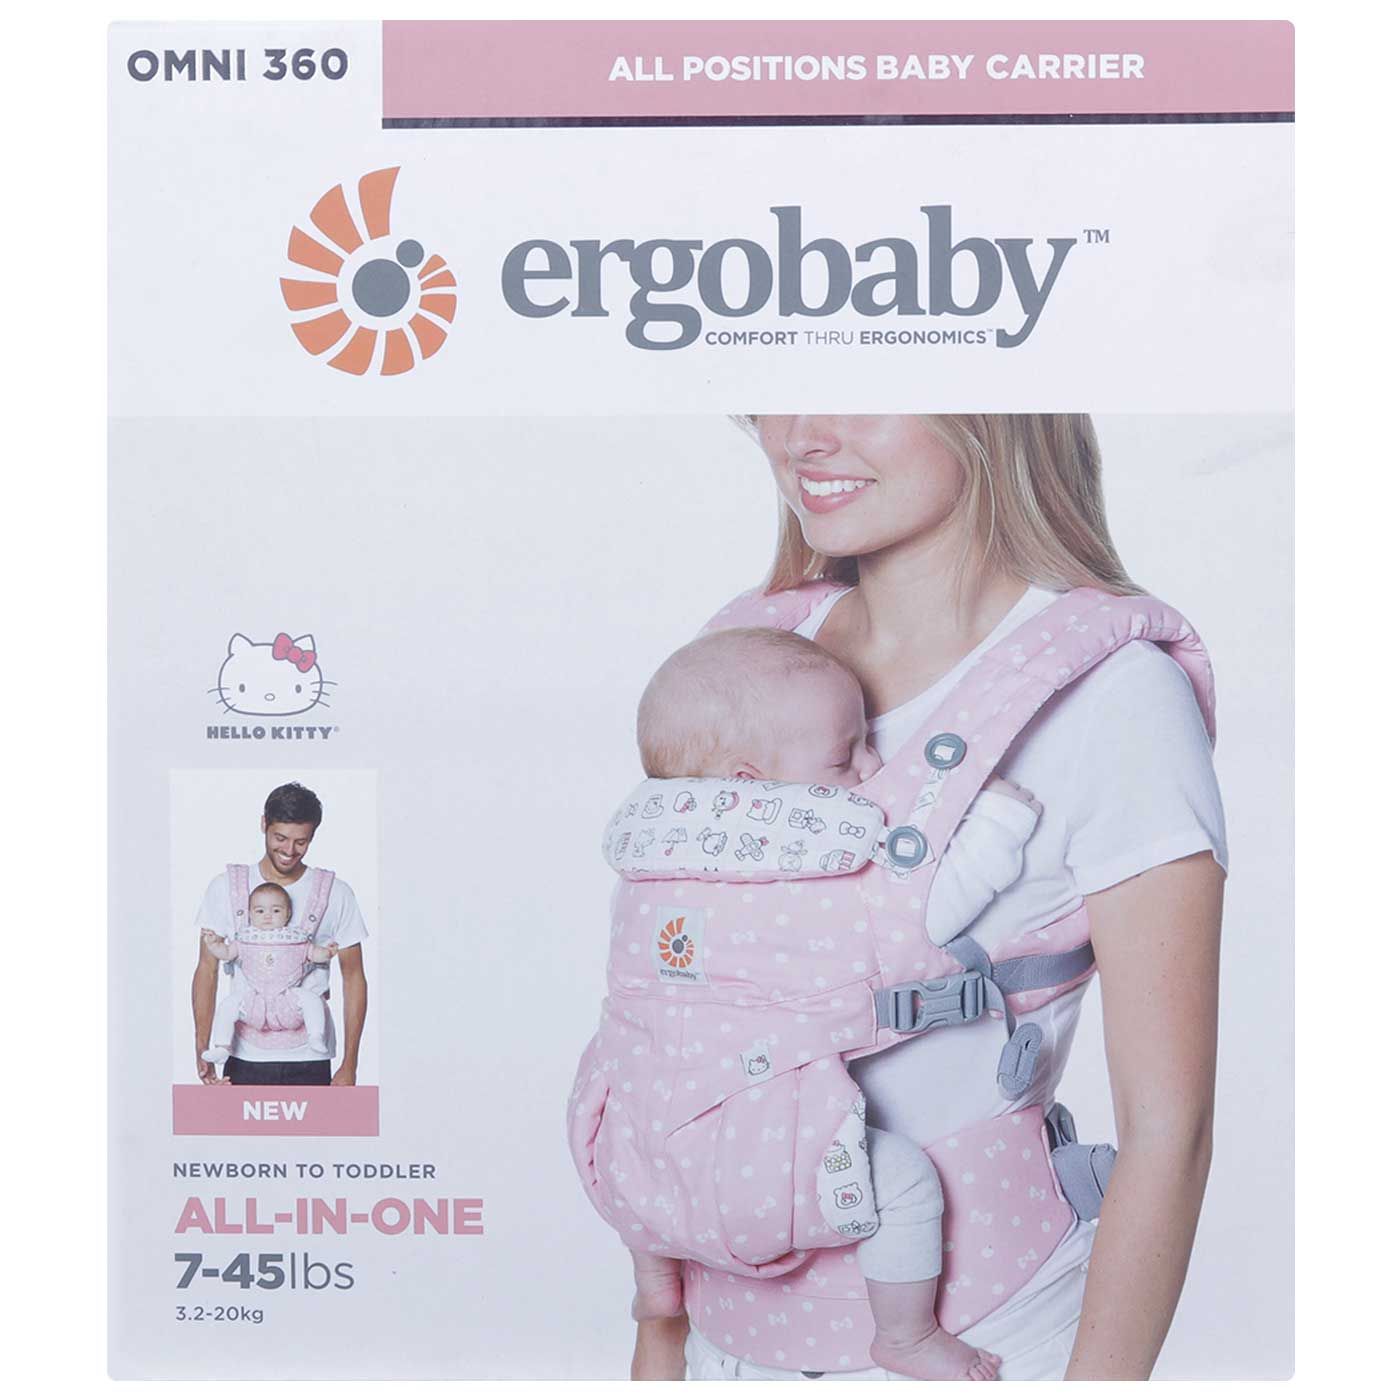 Ergobaby Carrier Omni 360 Playtime (Limited Edition) - 2